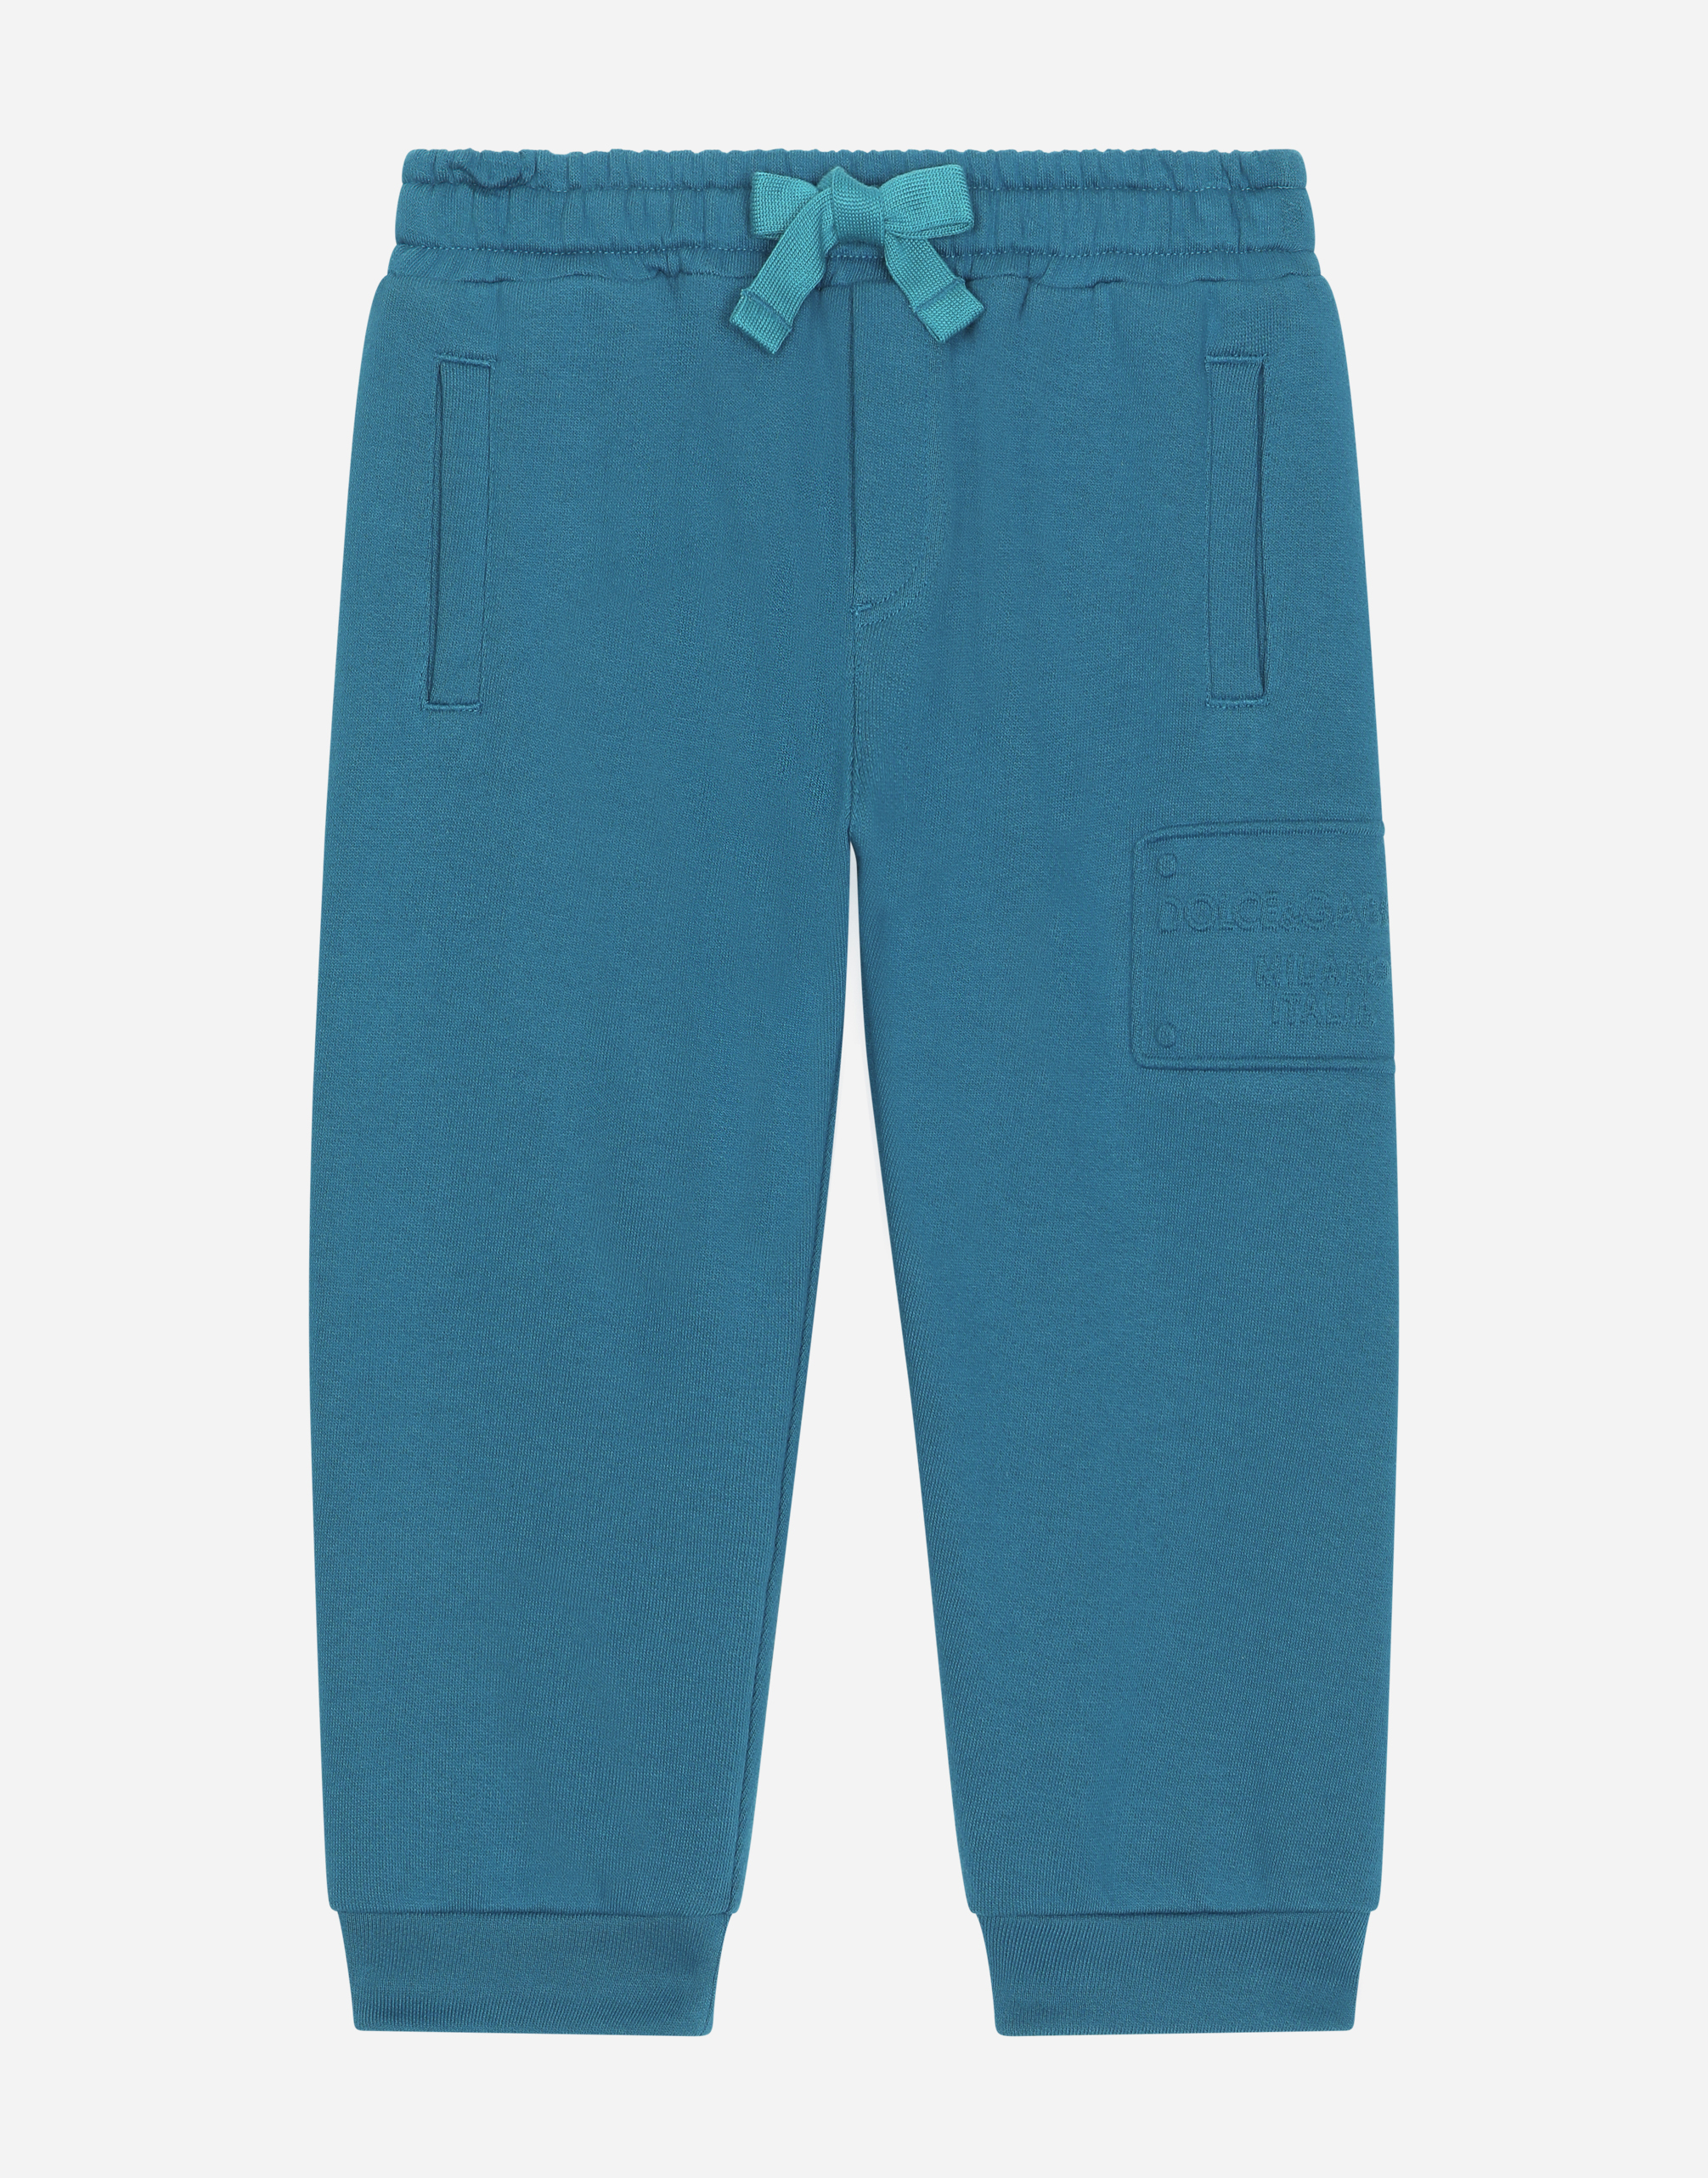 Jersey jogging pants with embossed maxi-logo in Turquoise